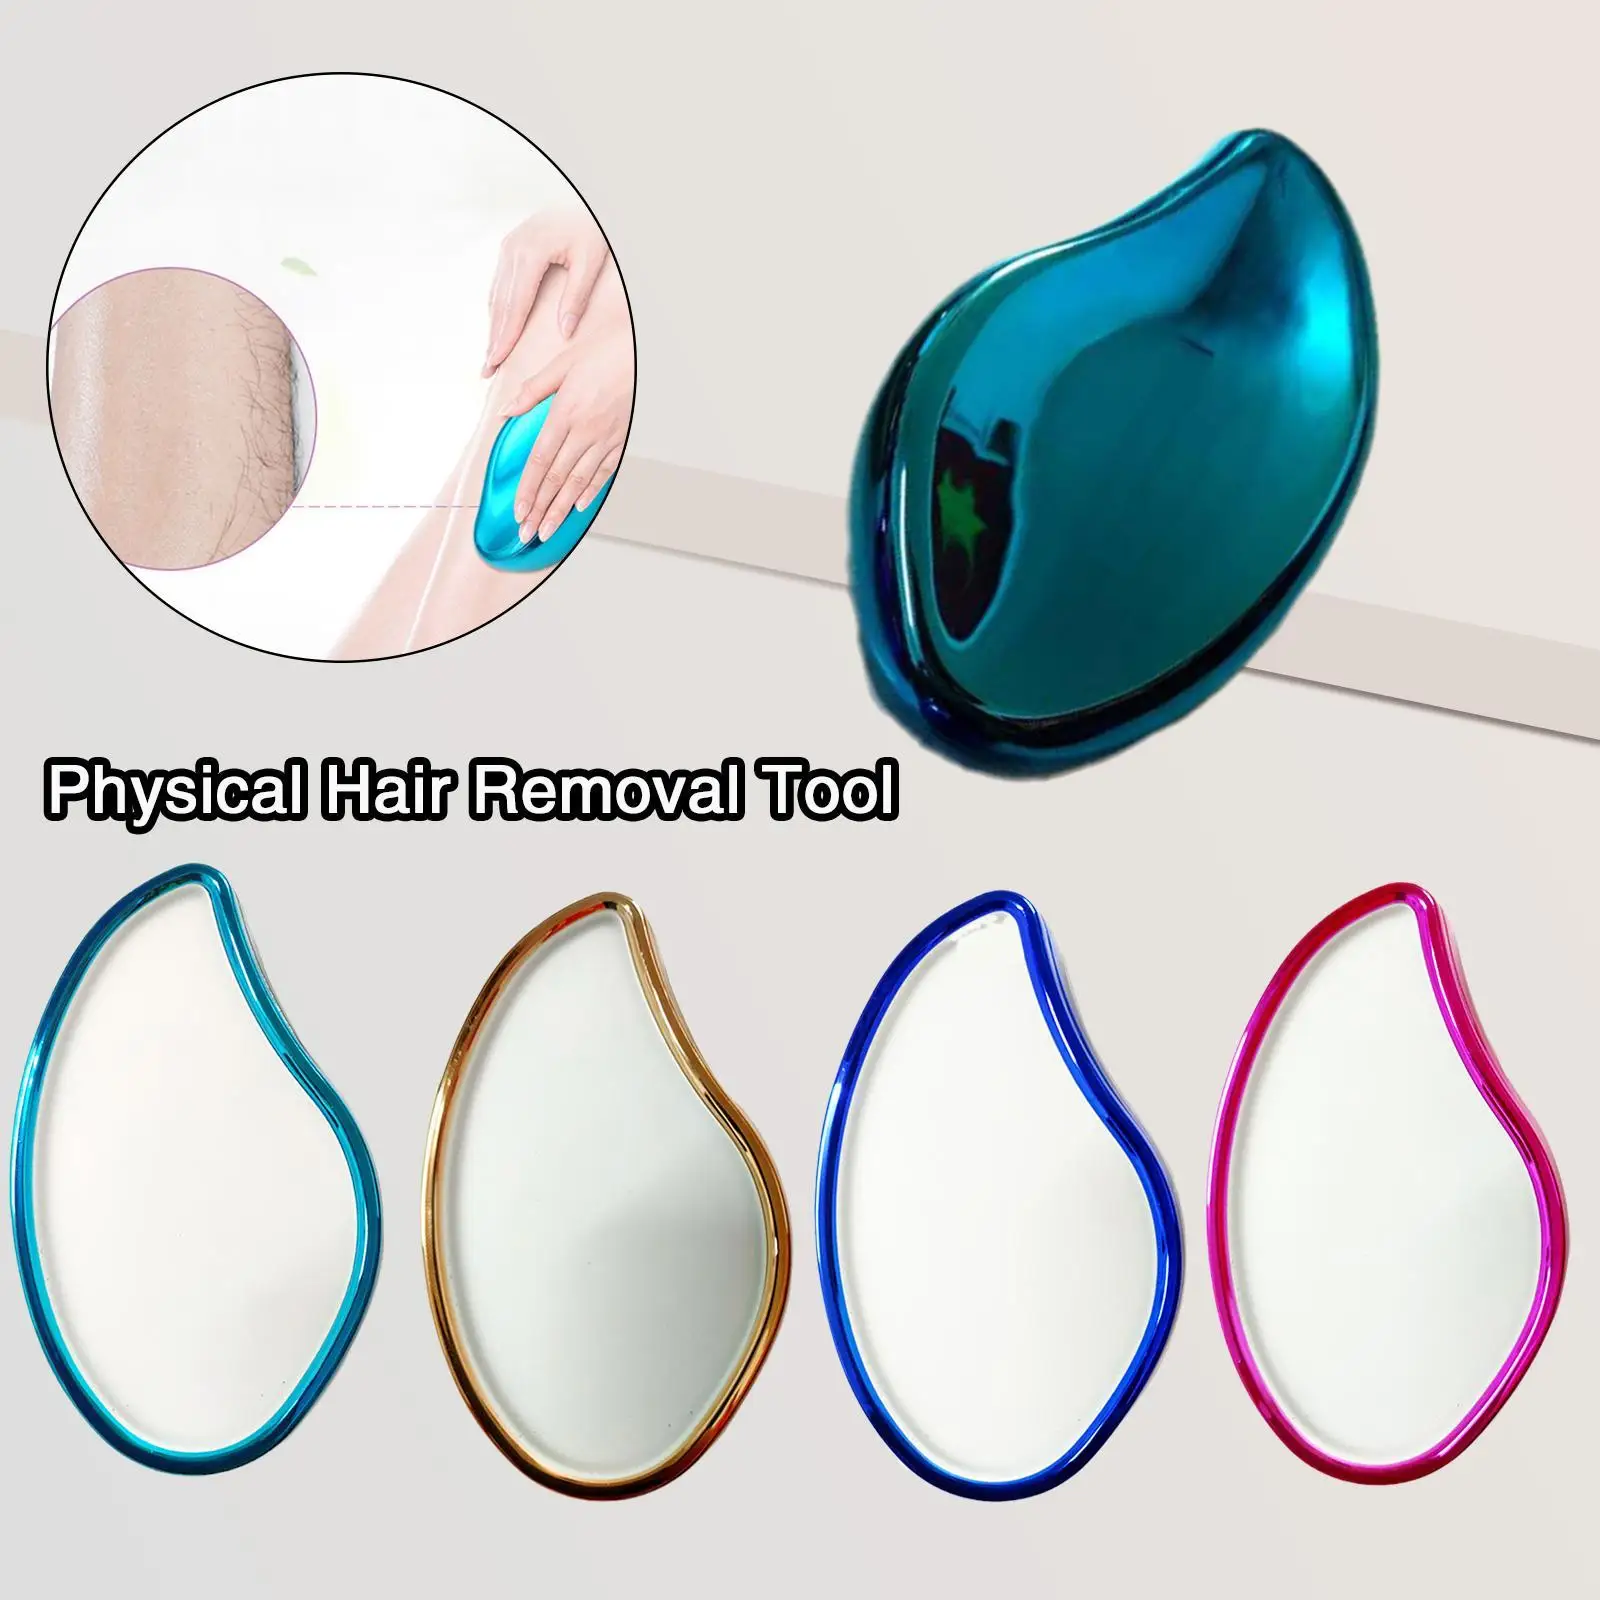 

Physical Hair Removal Painless Safe Epilator Easy Cleaning Reusable Body Beauty Depilation Tool Hair Eraser For Body Arm Legs